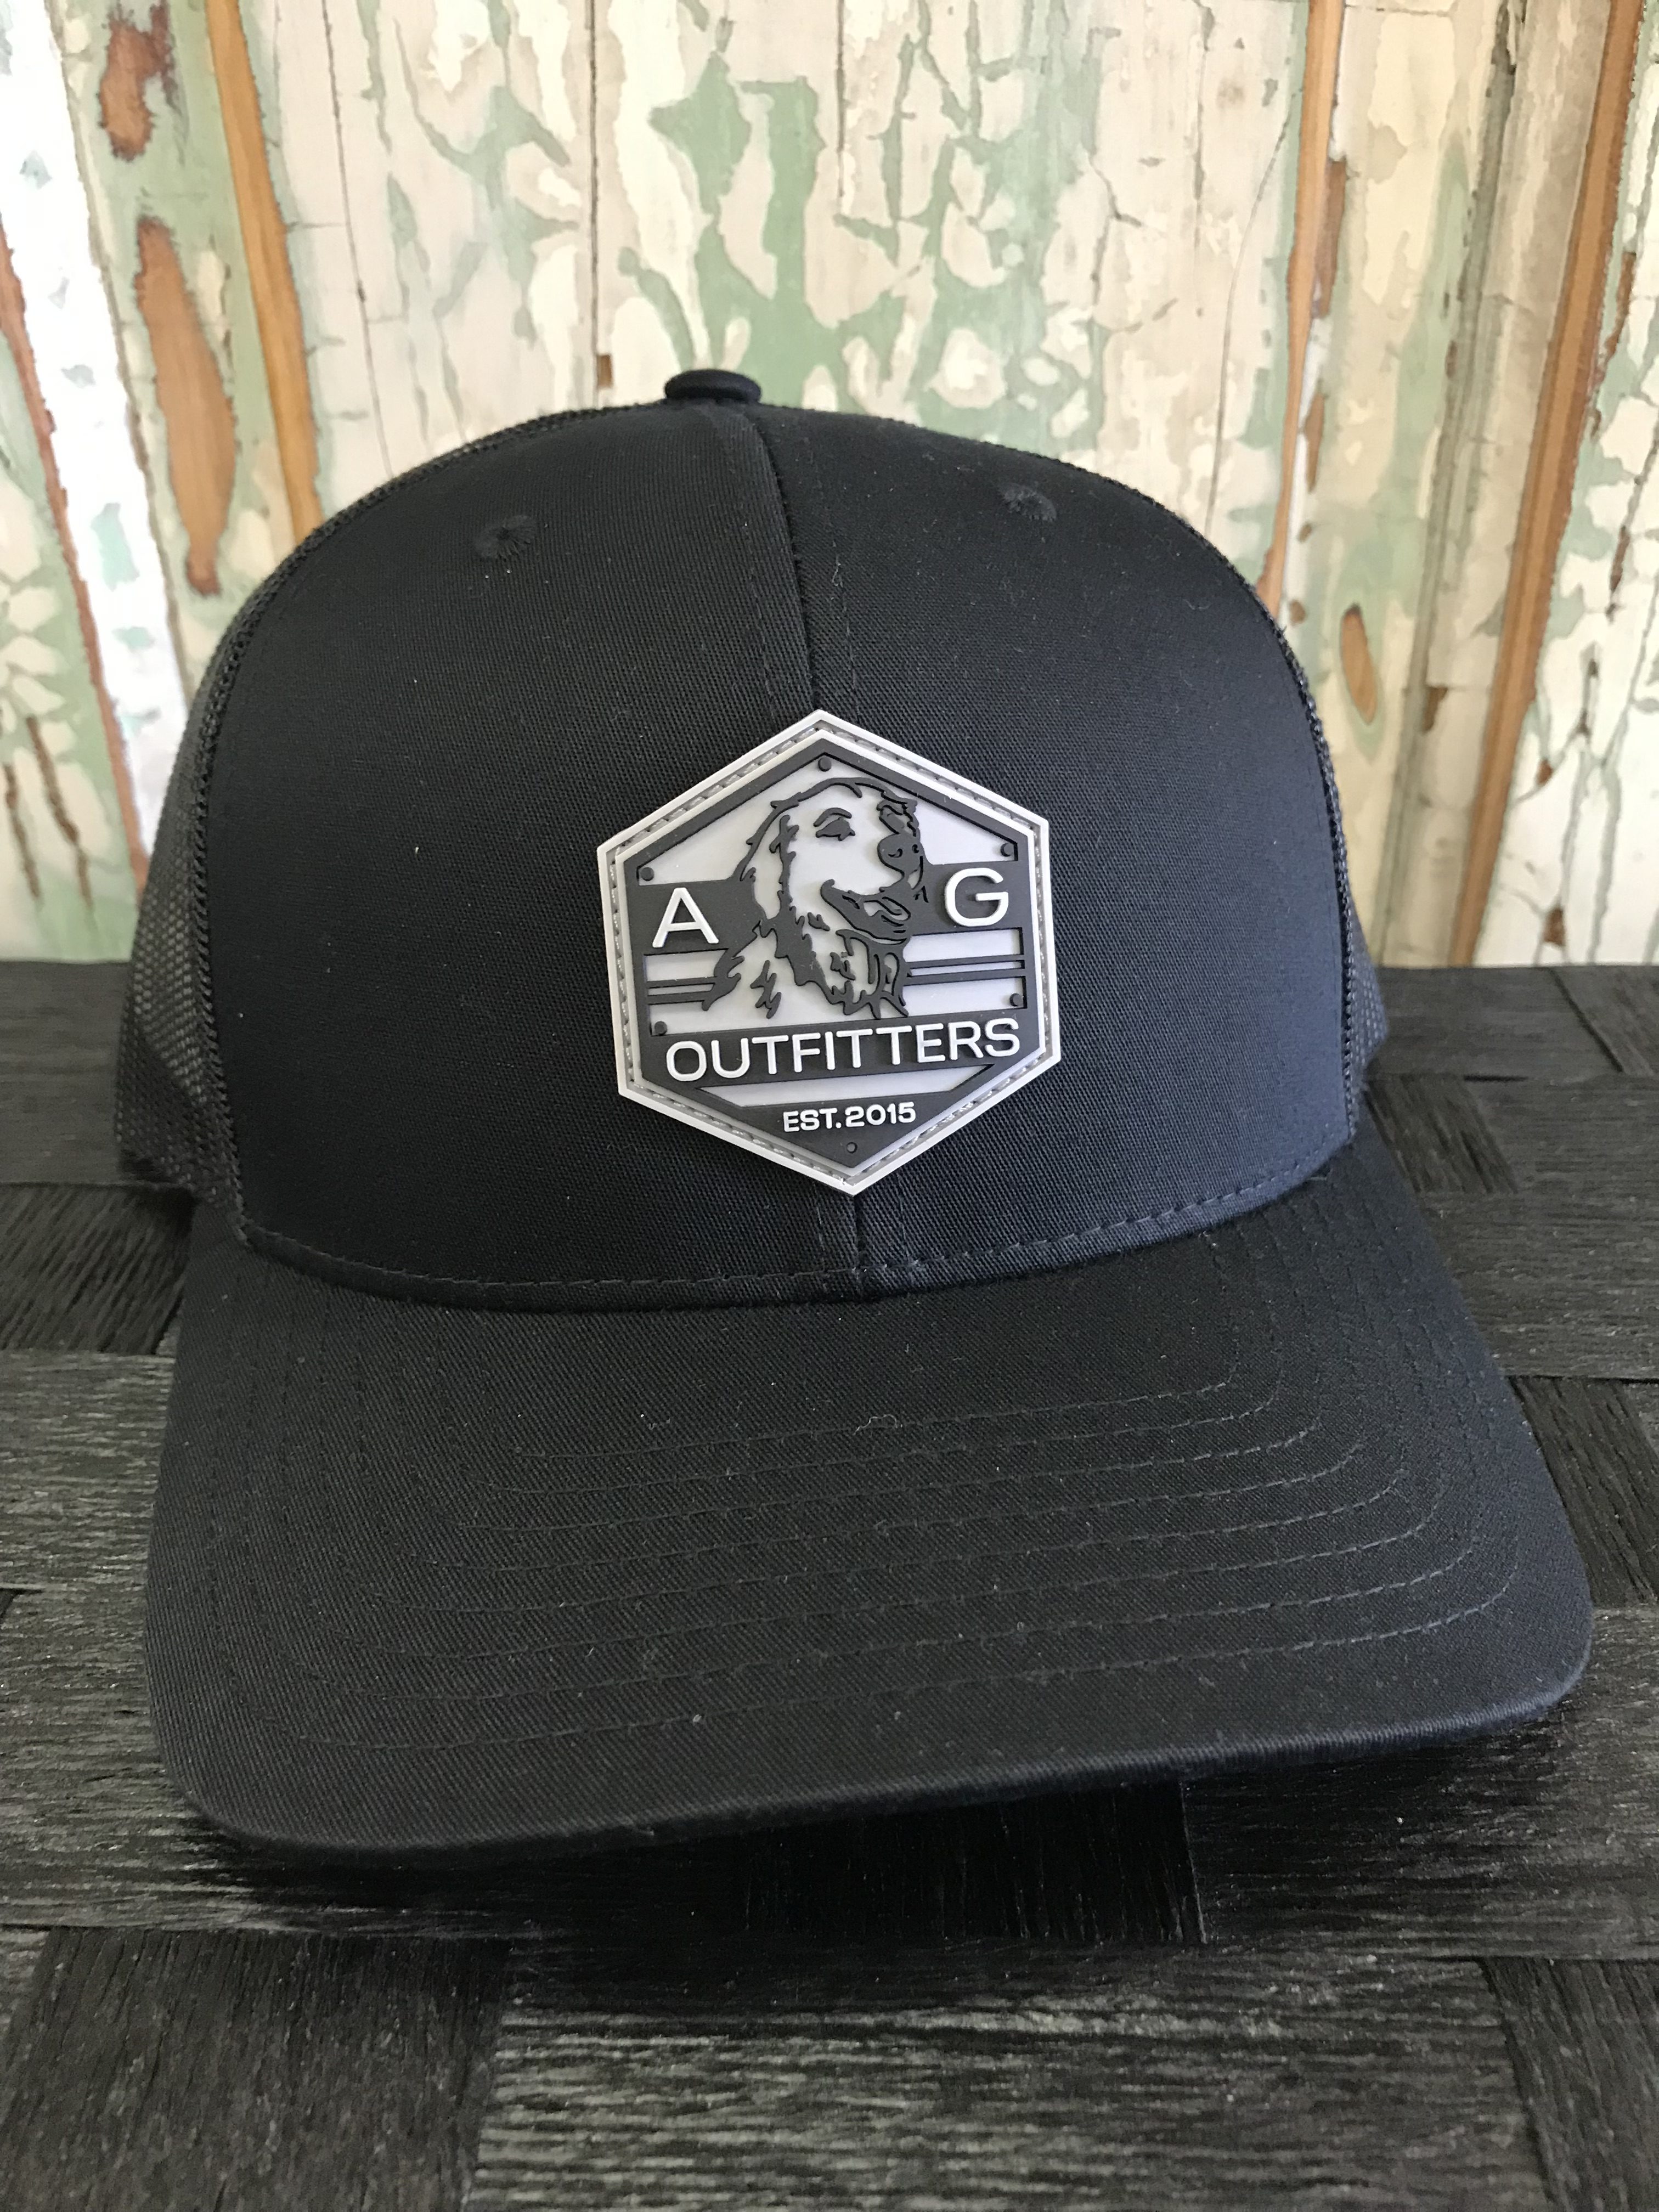 AG Outfitters Rubber Logo Patch Trucker Hat Black/Black - AG Outfitters NC